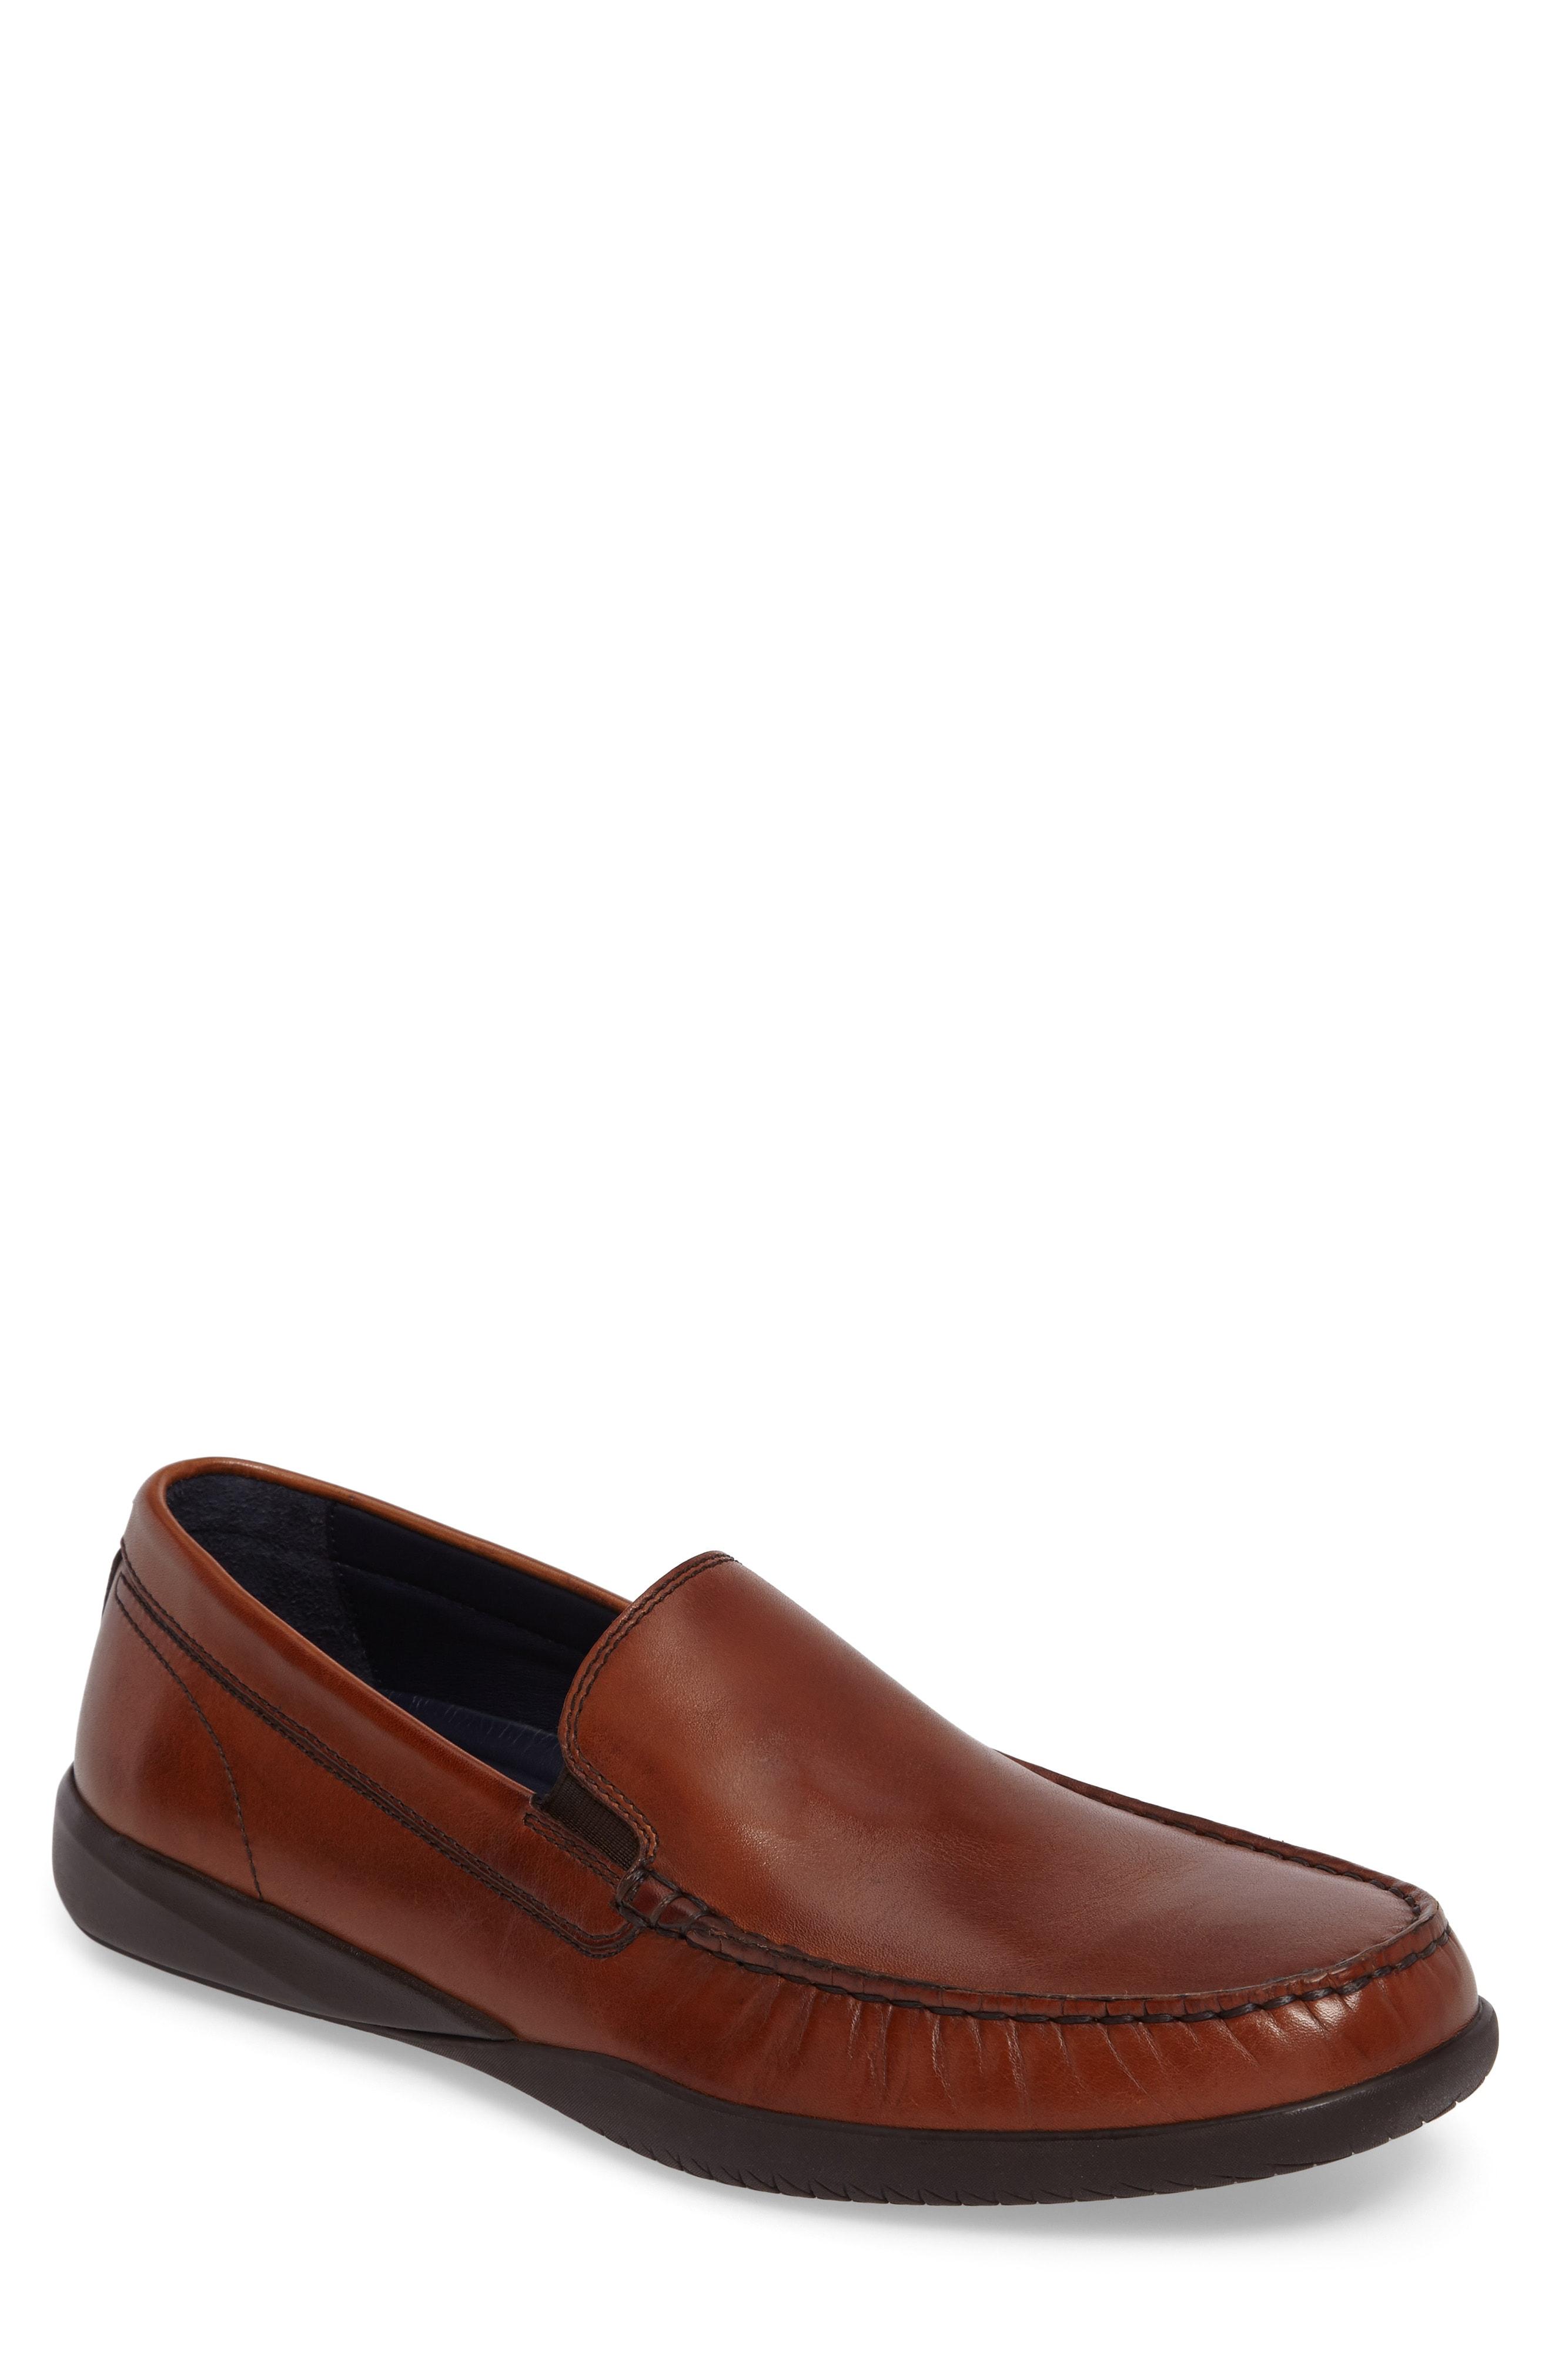 Cole Haan Lovell 2 Loafer In British Tan | ModeSens